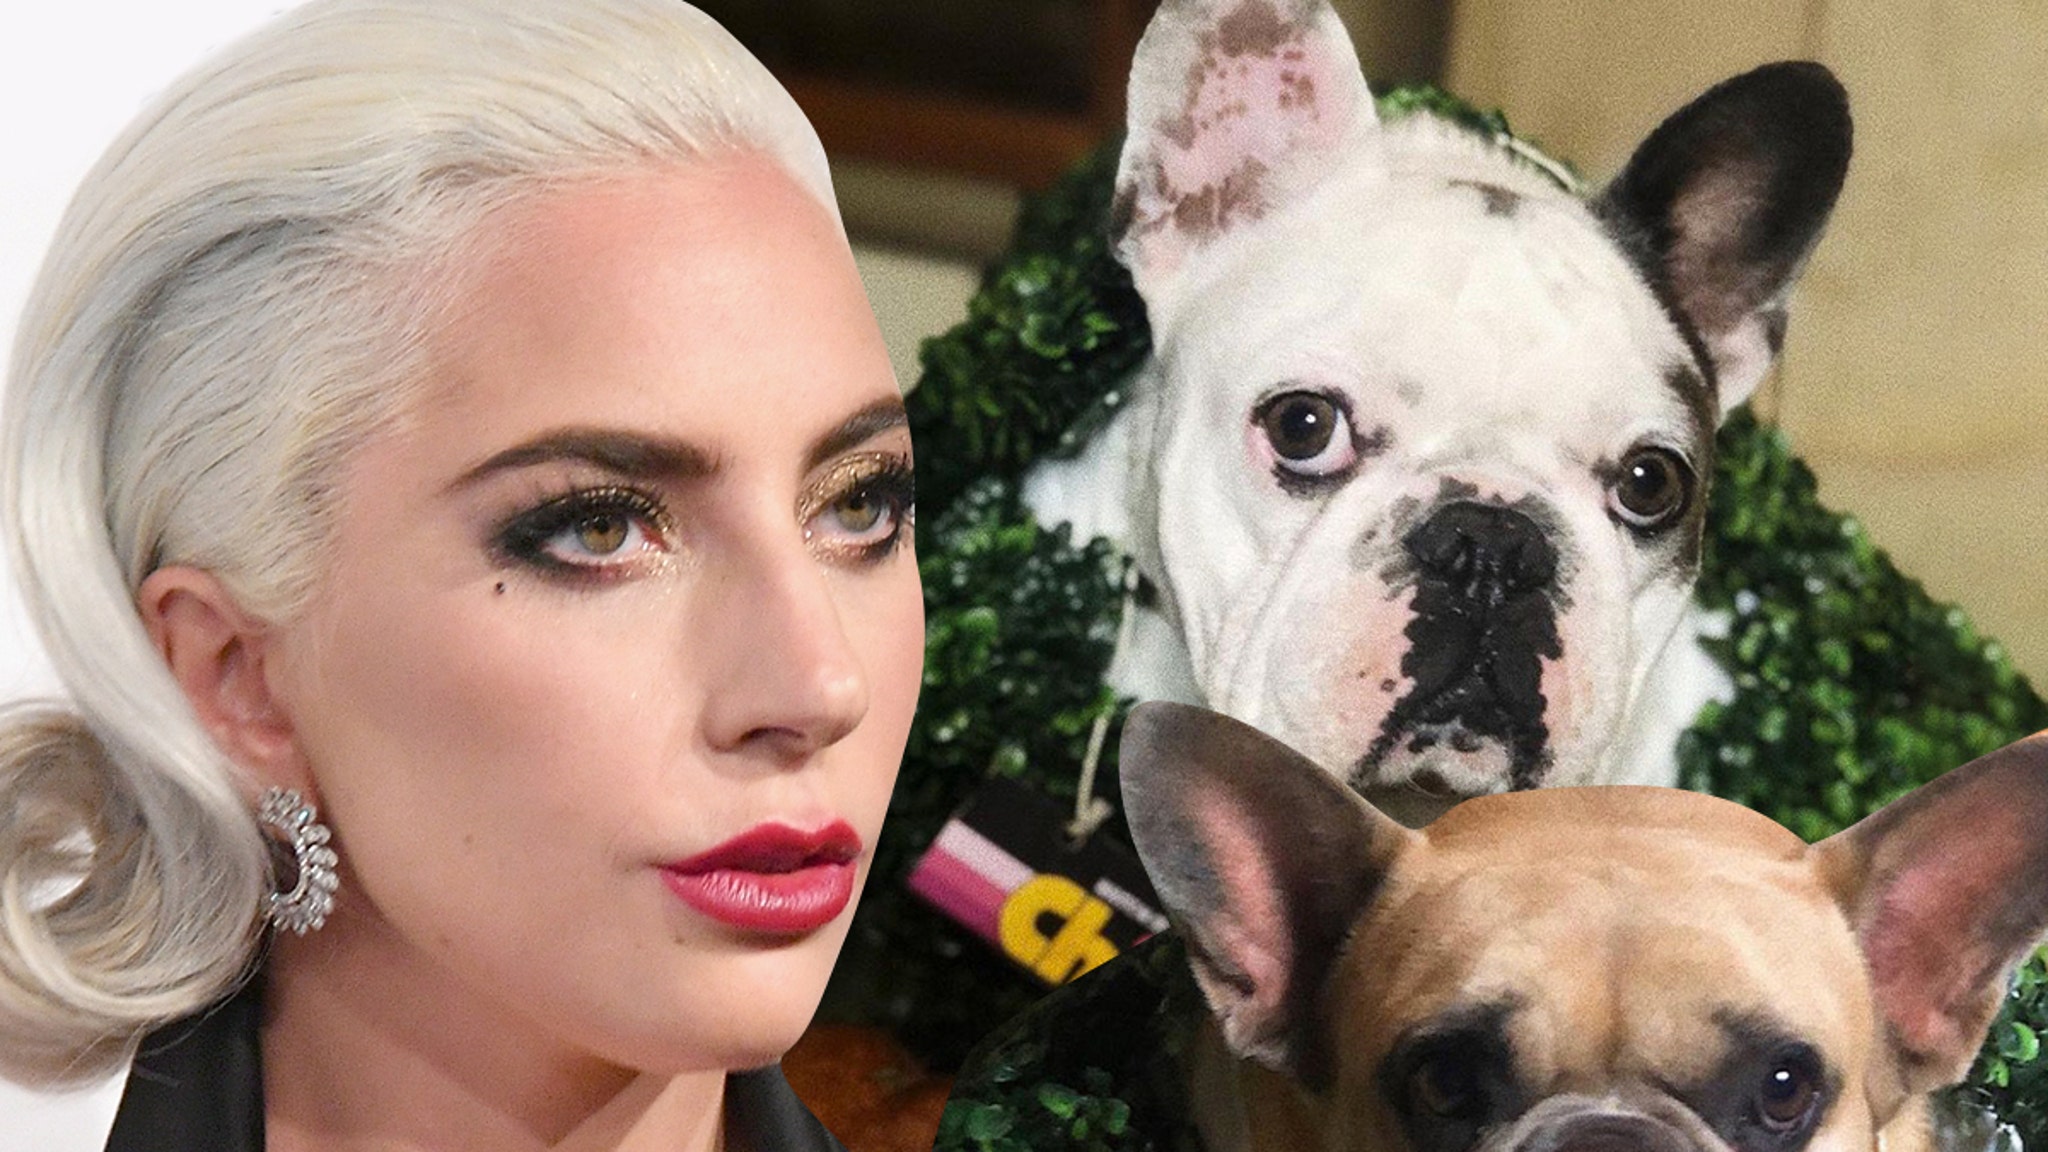 Lady Gaga Dognappers may have chosen the singer as a rescue target